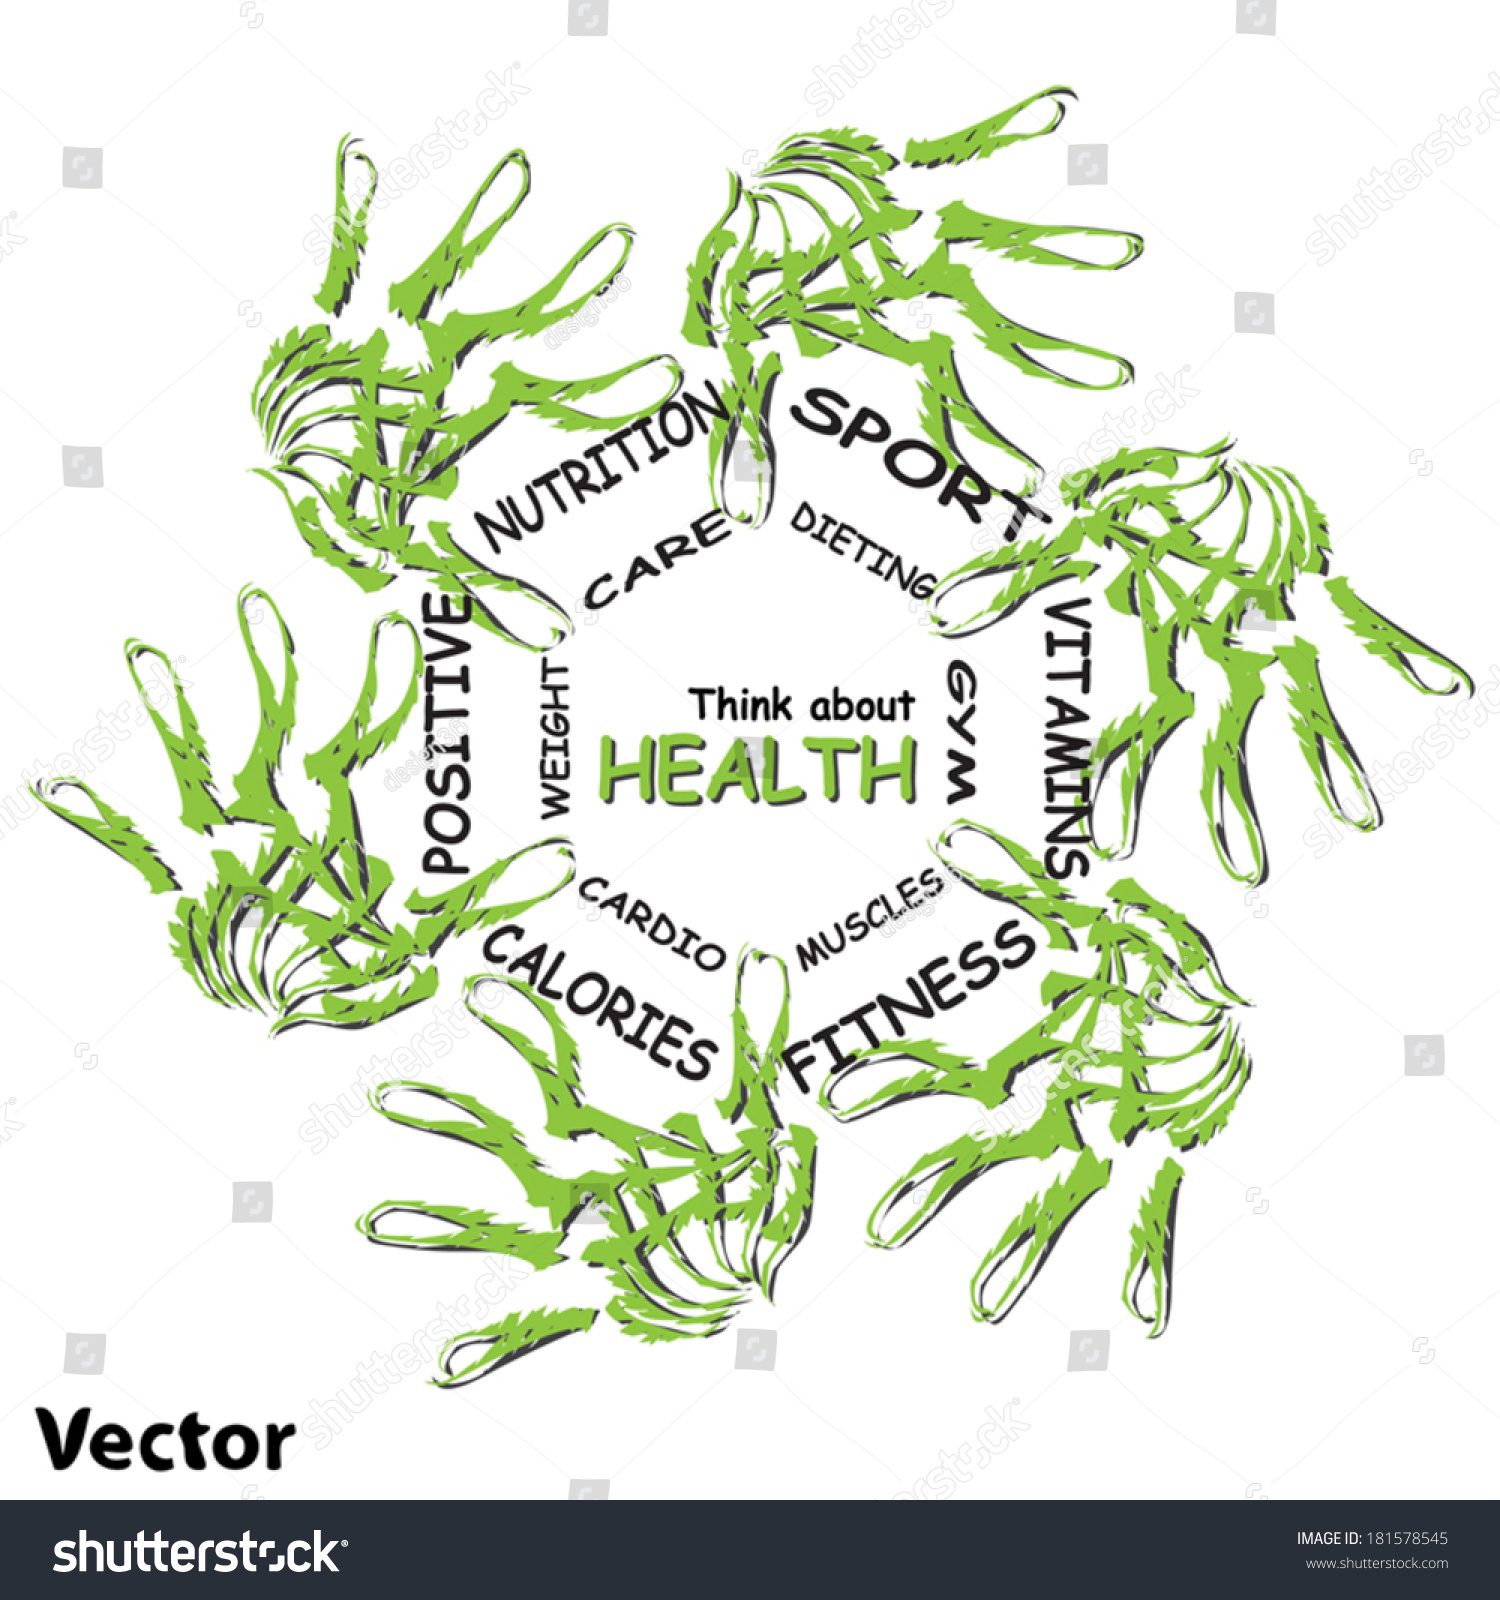 Vector Concept Circle Health Word Cloud Stock Vector Royalty Free 181578545 Shutterstock 3349